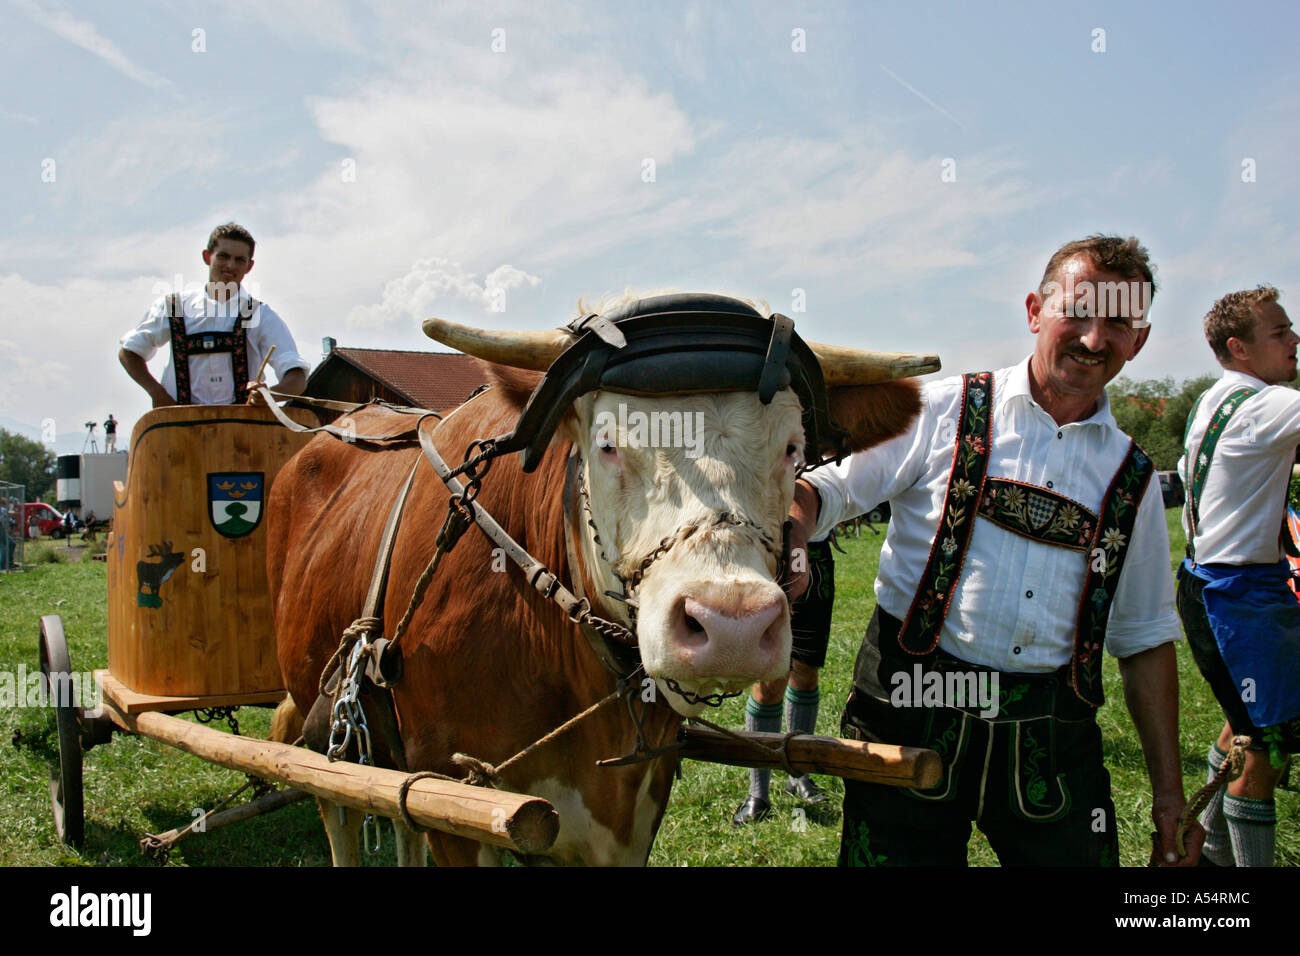 First oxrace of Bichl, August 8th 2004, Upper Bavaria, Germany Stock Photo